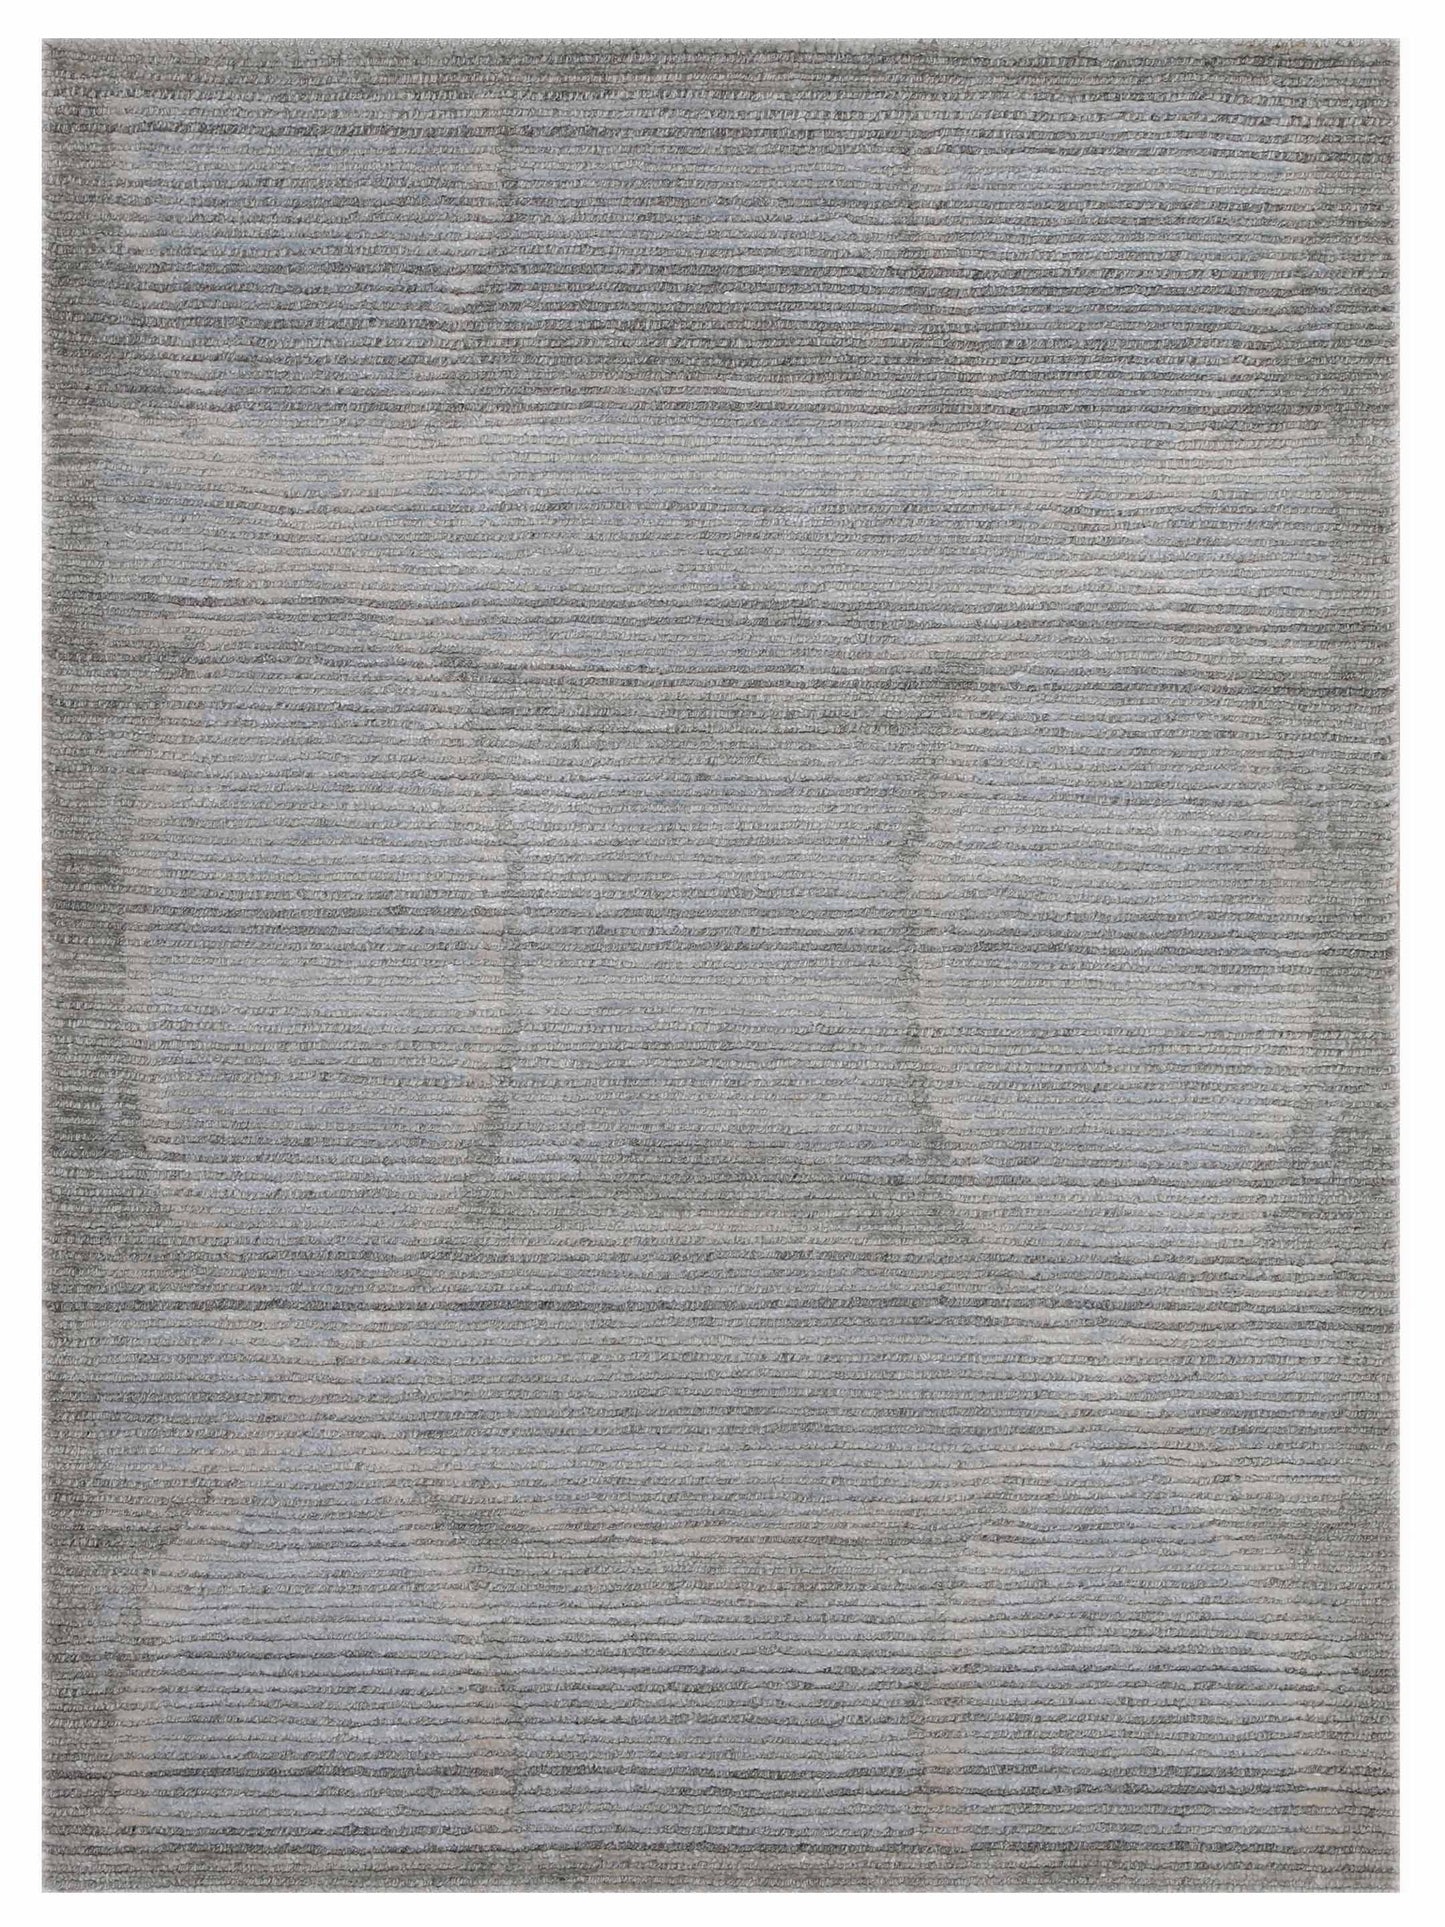 Artisan Mary MN-399 Sage Contemporary Knotted Rug